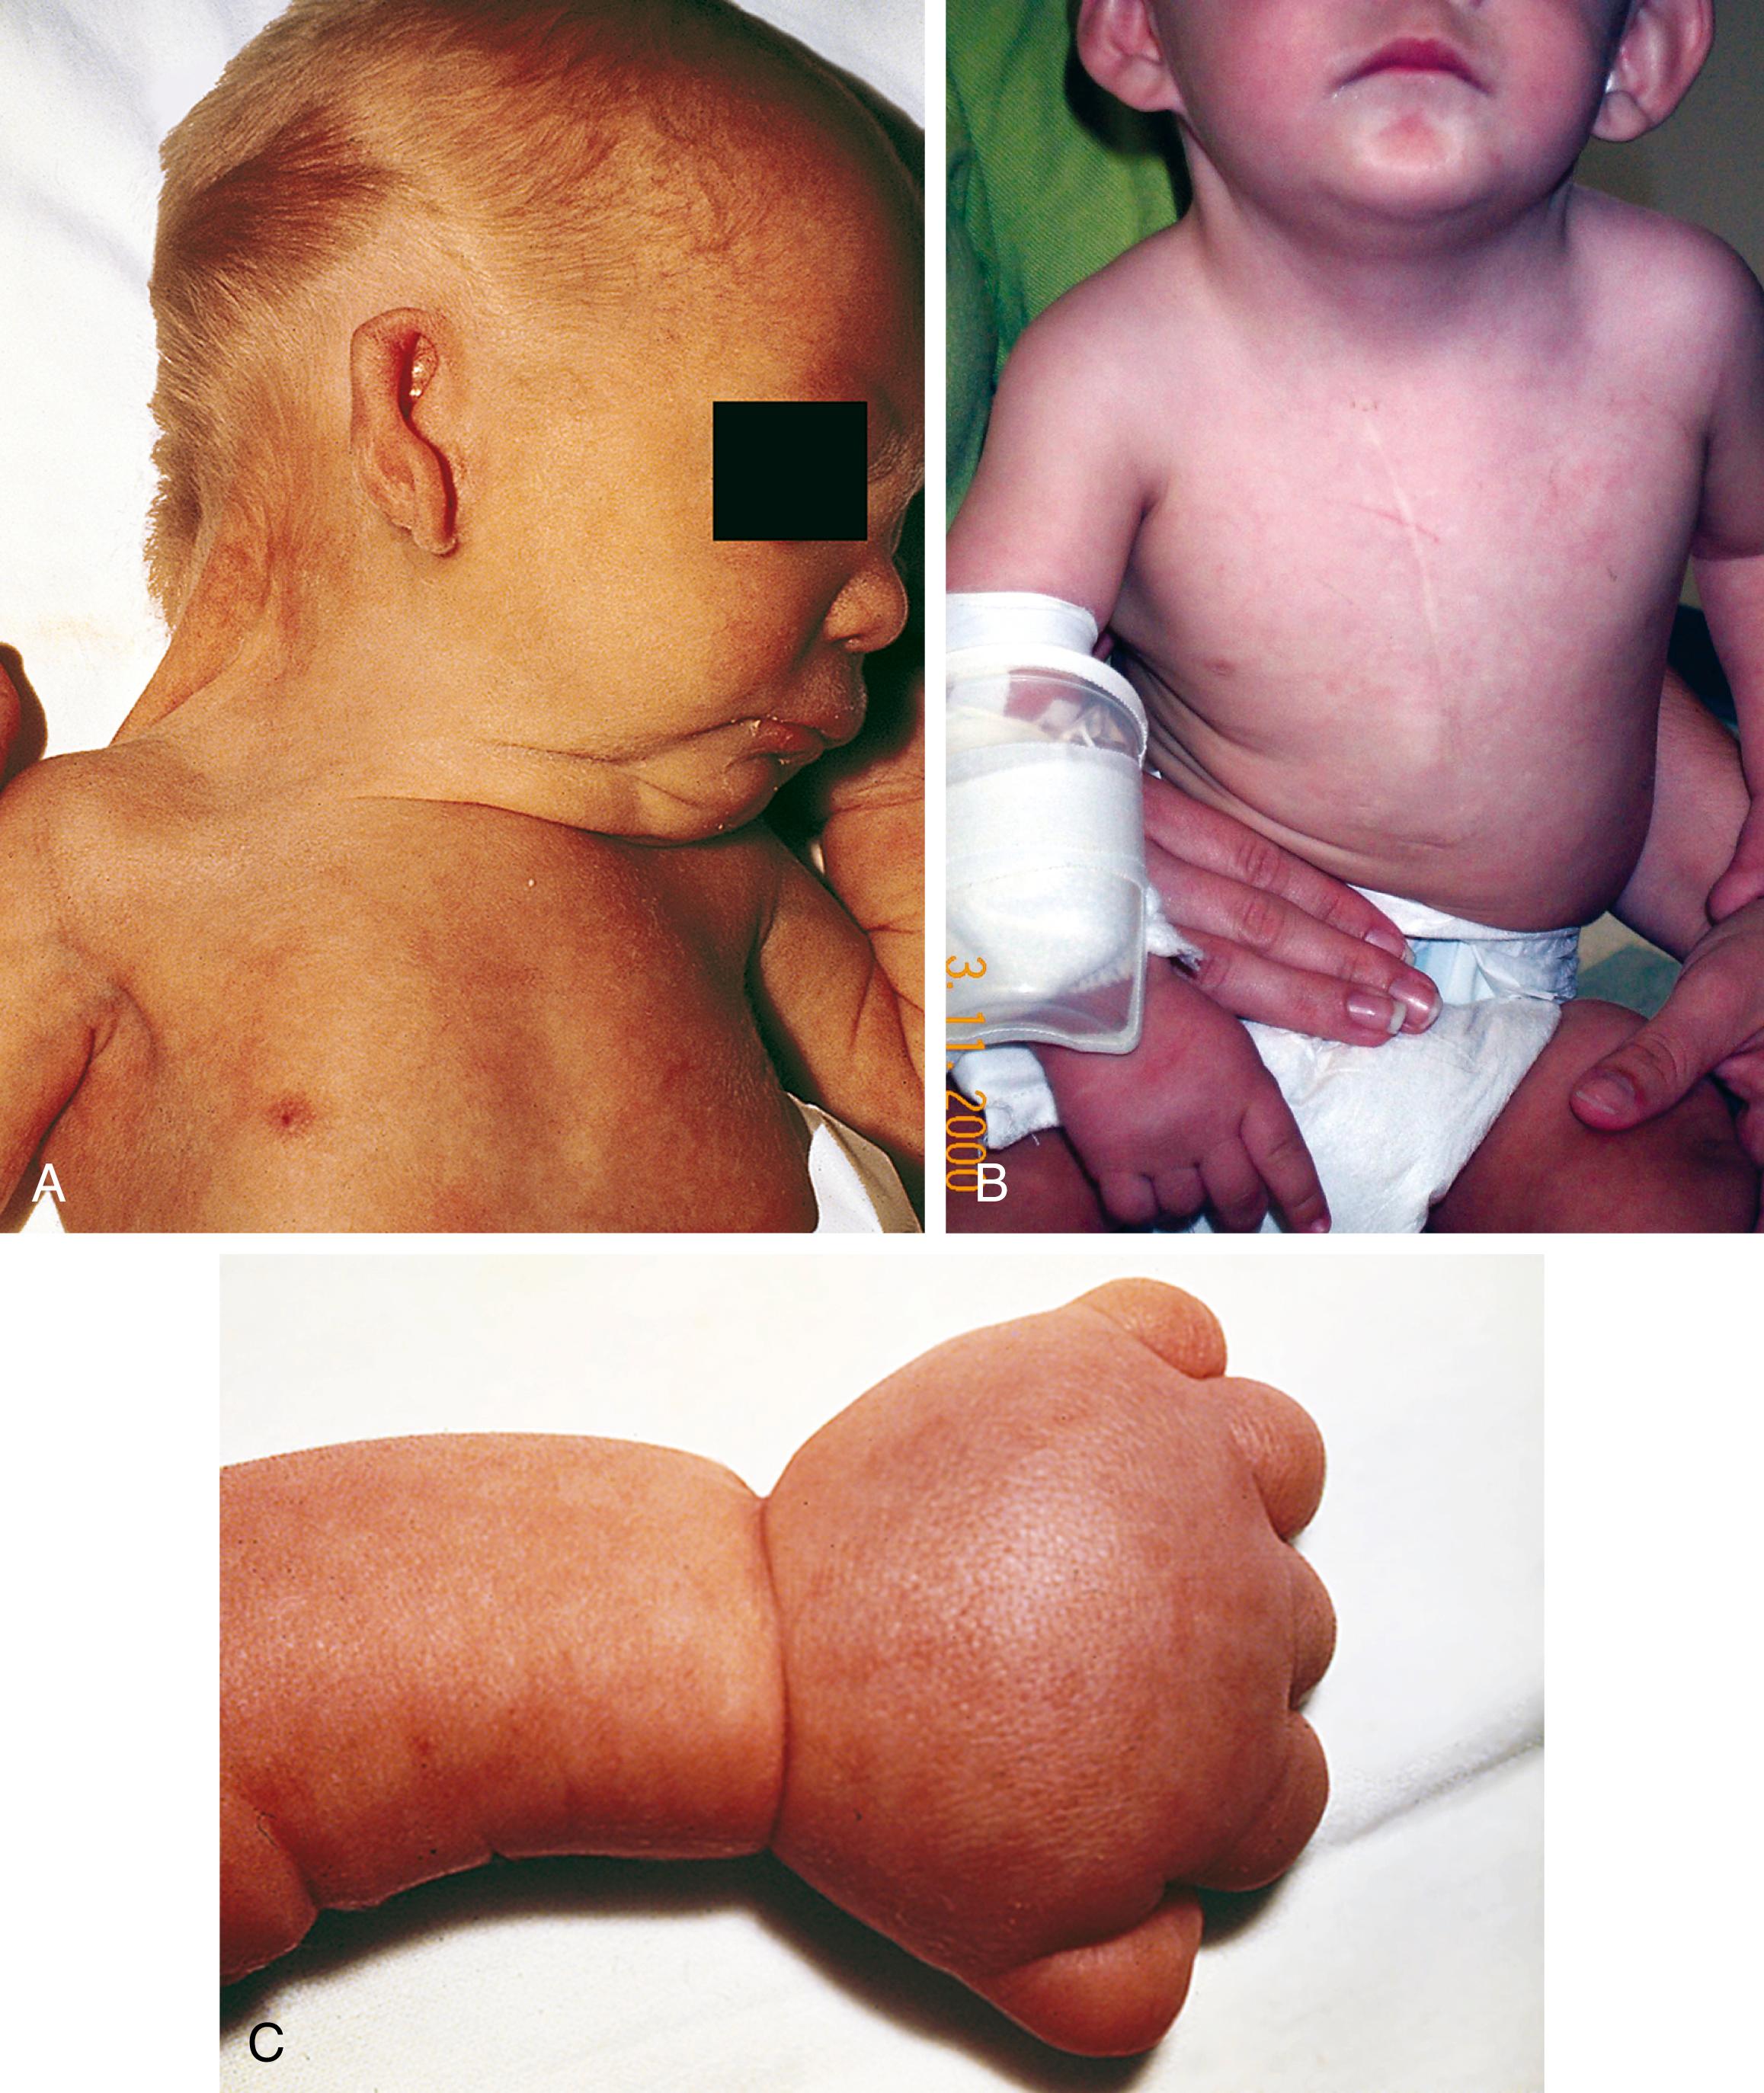 Fig. 1.18, Clinical photographs show several physical manifestations associated with Turner syndrome. (A) In this newborn, a webbed neck with low hairline, shield chest with widespread nipples, abnormal ears, and micrognathia are seen. (B) In this frontal view, mild webbing of the neck and small widely spaced nipples are evident, along with a midline scar from prior cardiac surgery. The ears are low-set and prominent, protruding forward. (C) The newborn shown in (A) also had prominent lymphedema of the hands and feet.